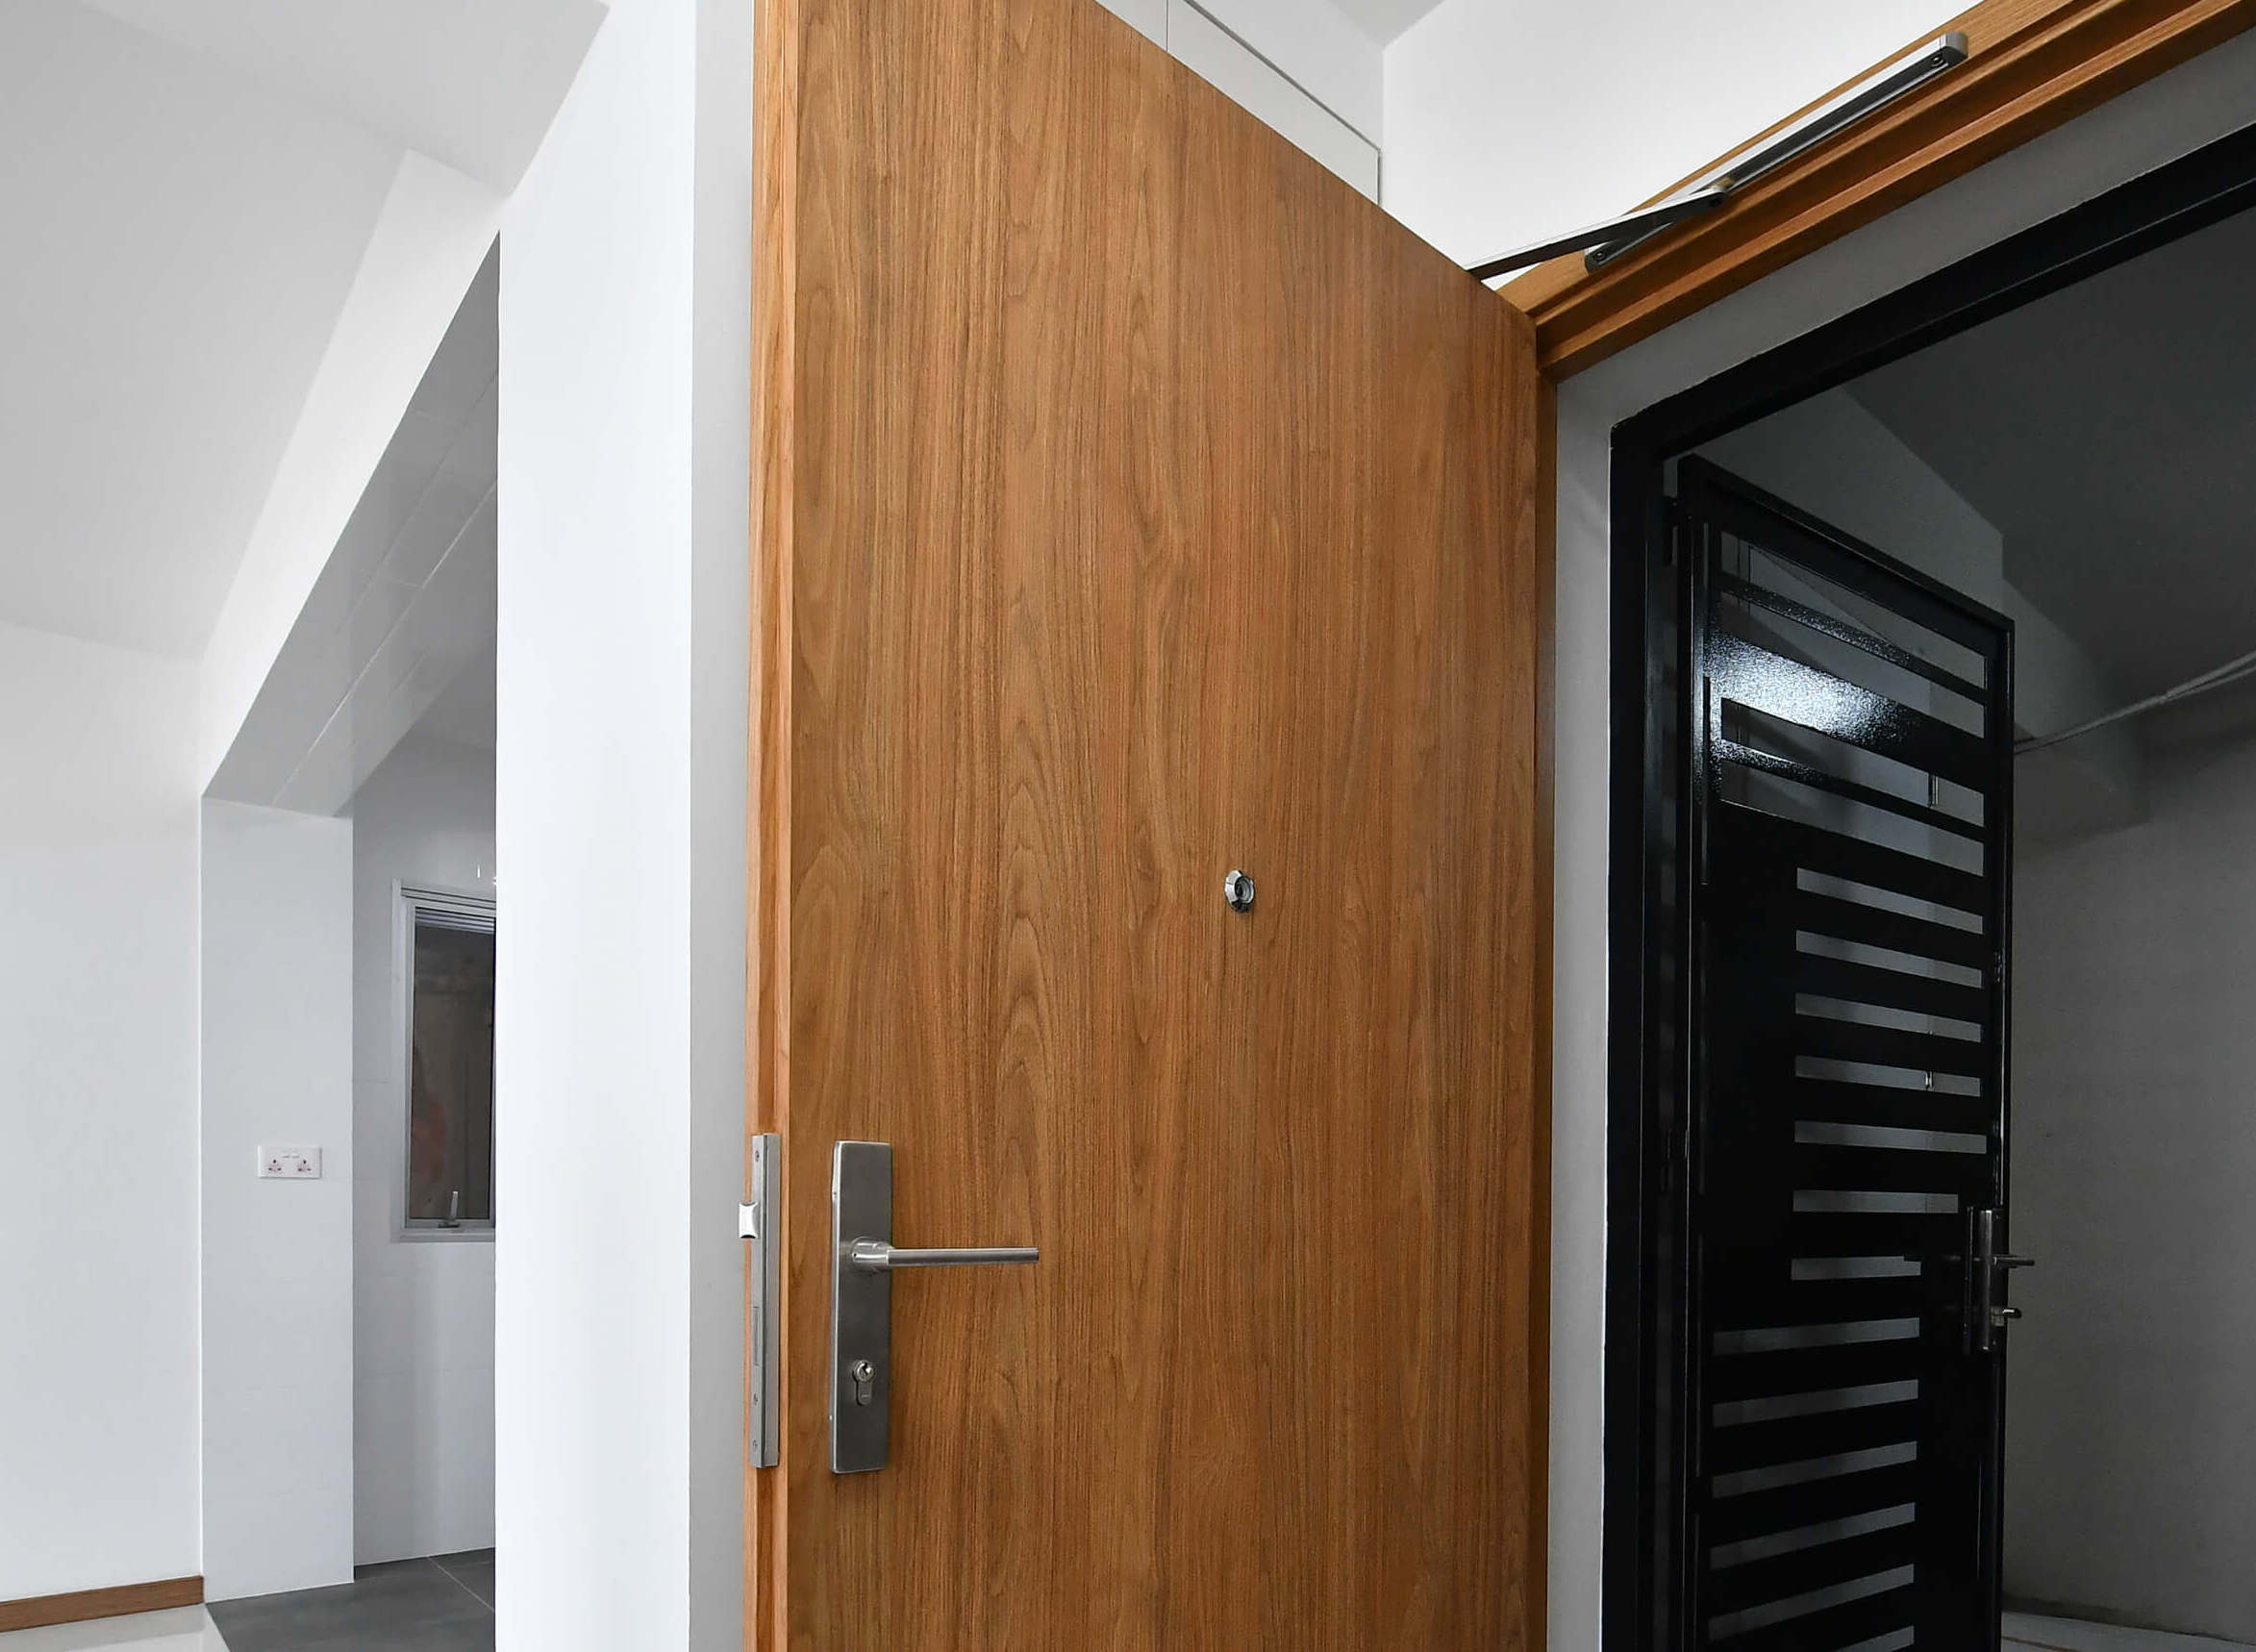 Selection criteria for selecting doors